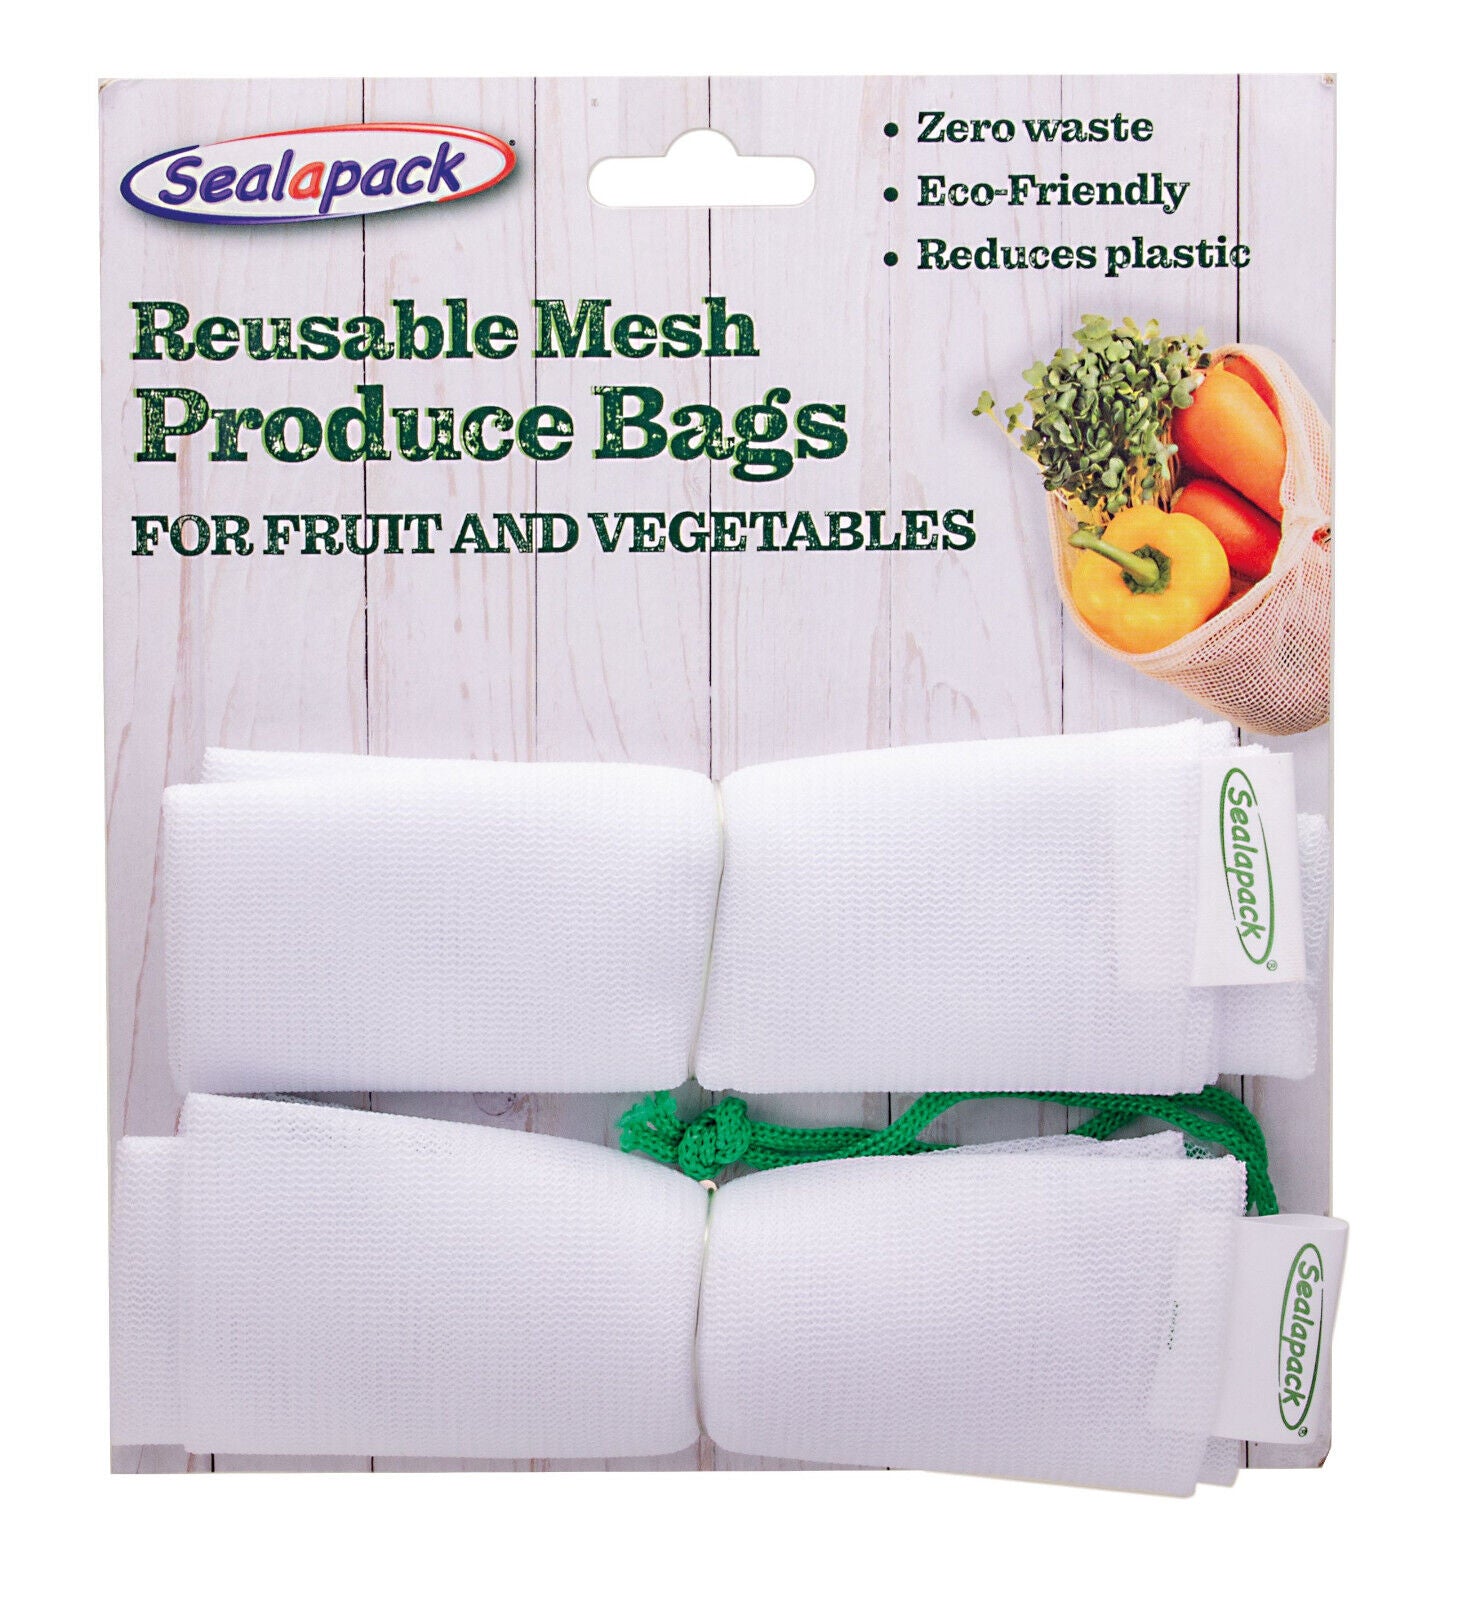 Cotton Mesh Produce Bags | Reusable Net Bags for Produce and Vegetables